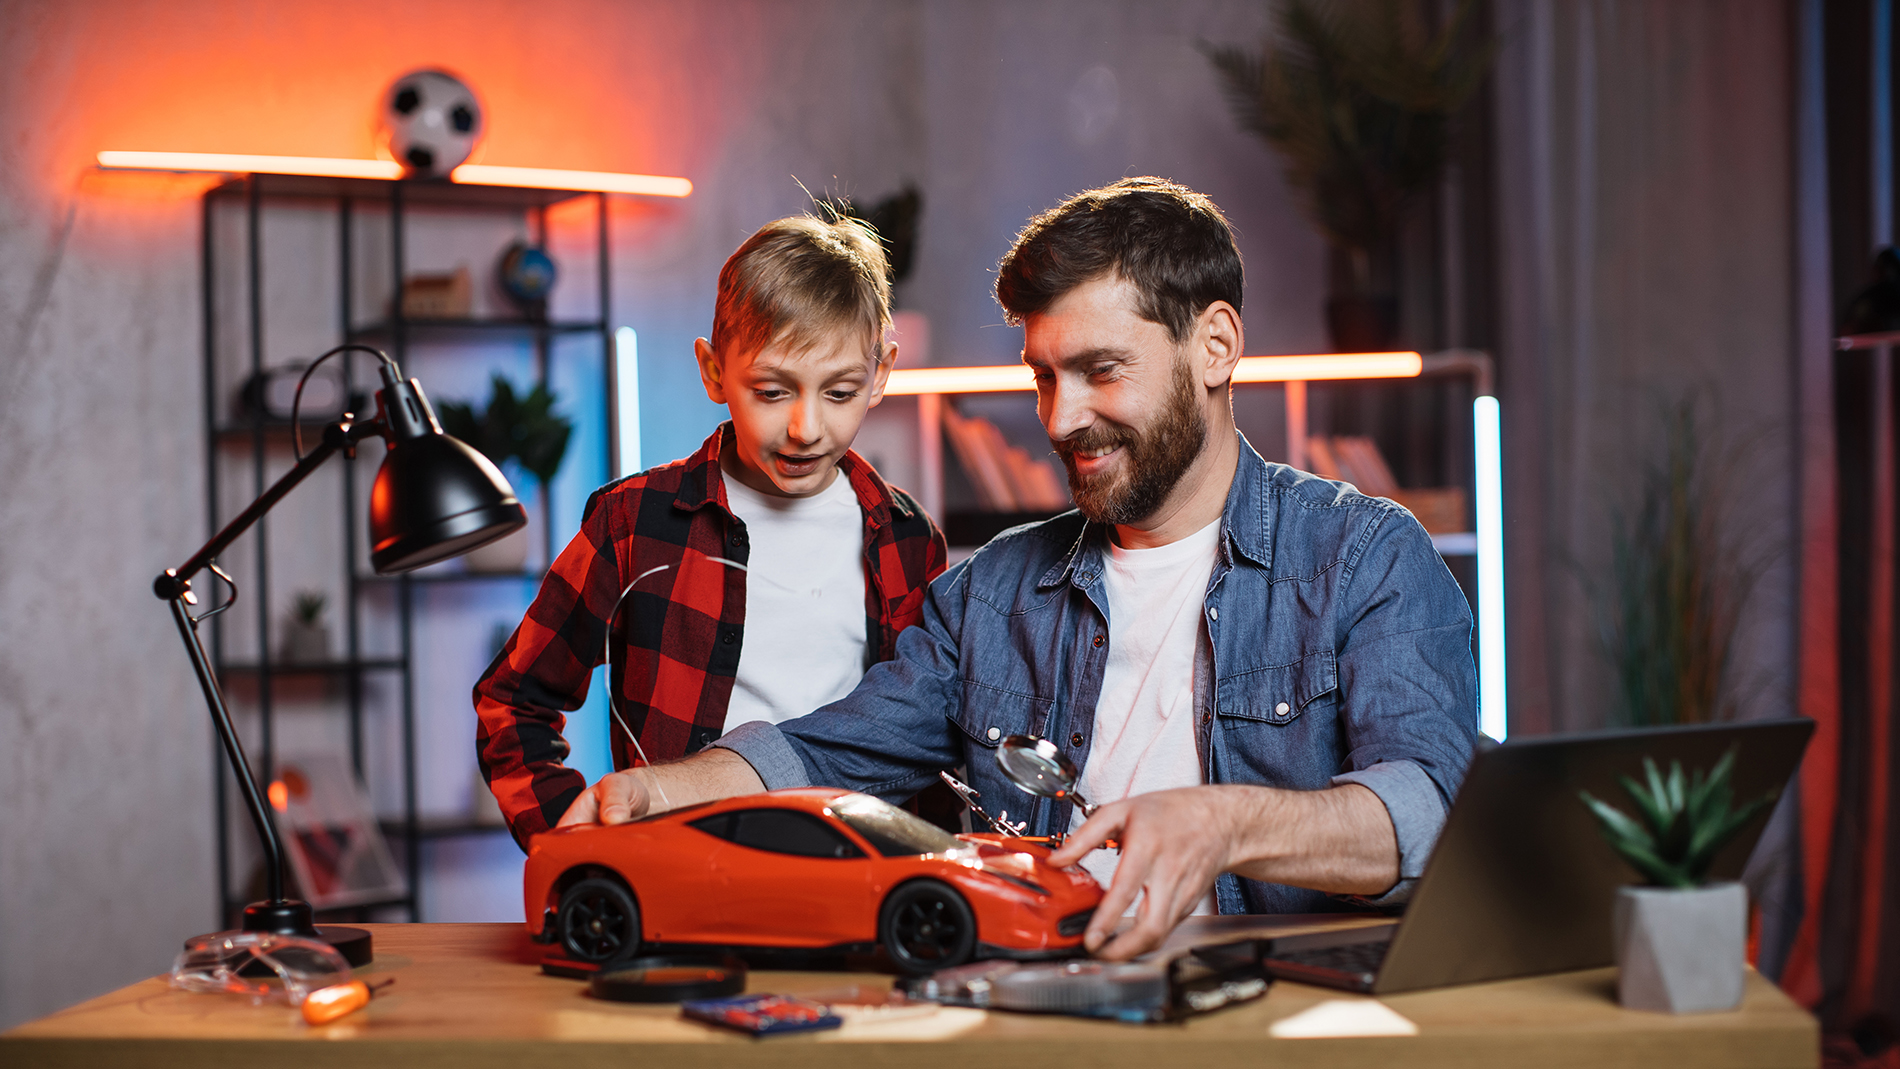 Father with son repaired remote controlled toy car